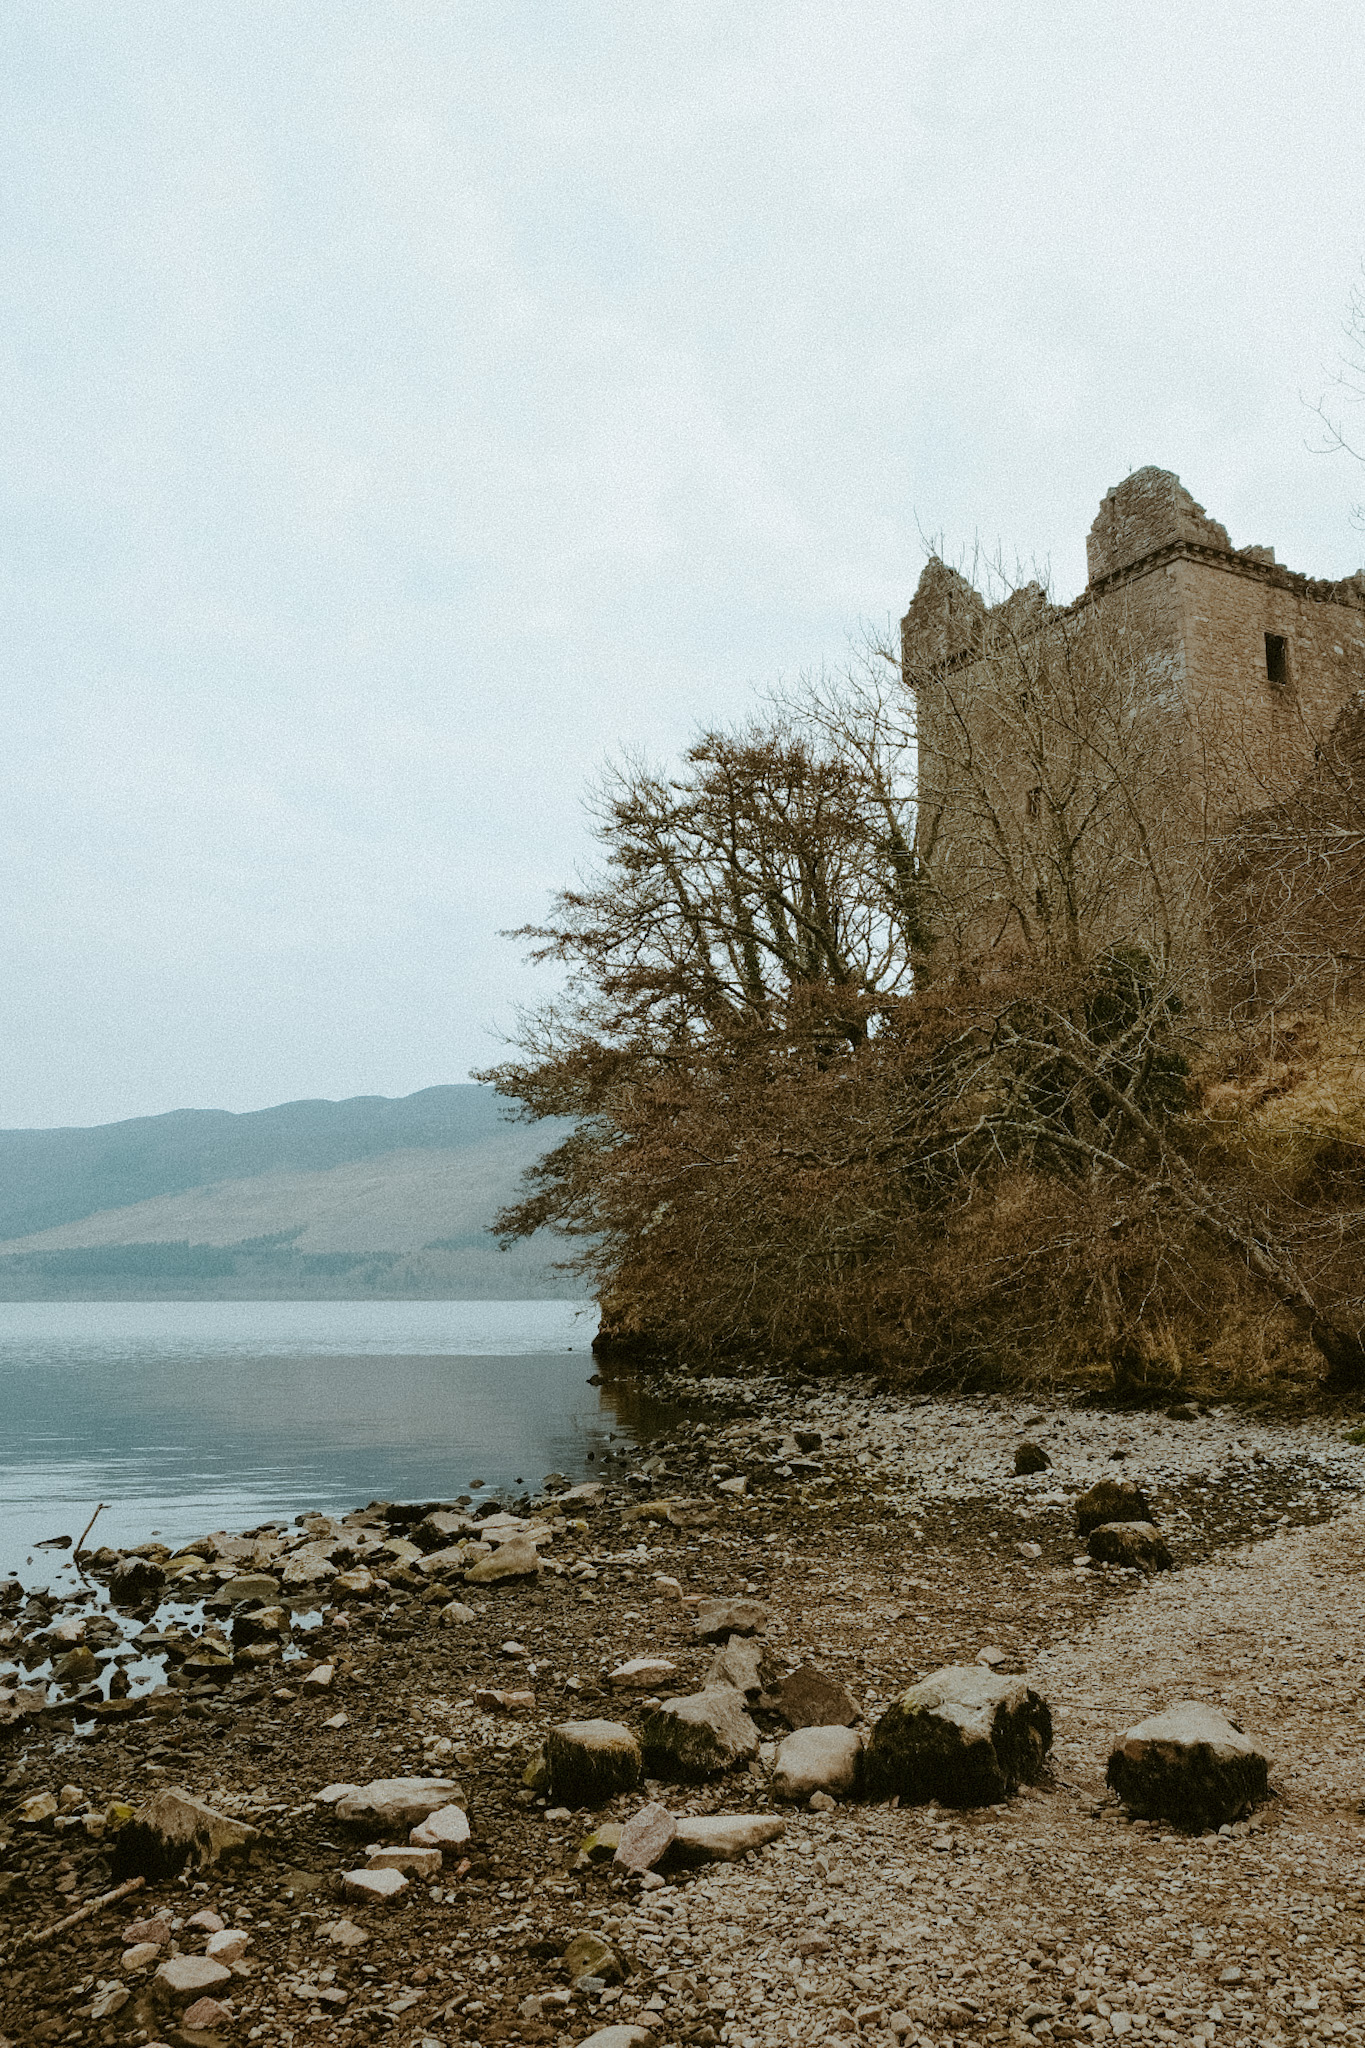 View of Urquhart Castle from the shores of Loch Ness near Inverness, Scotland.